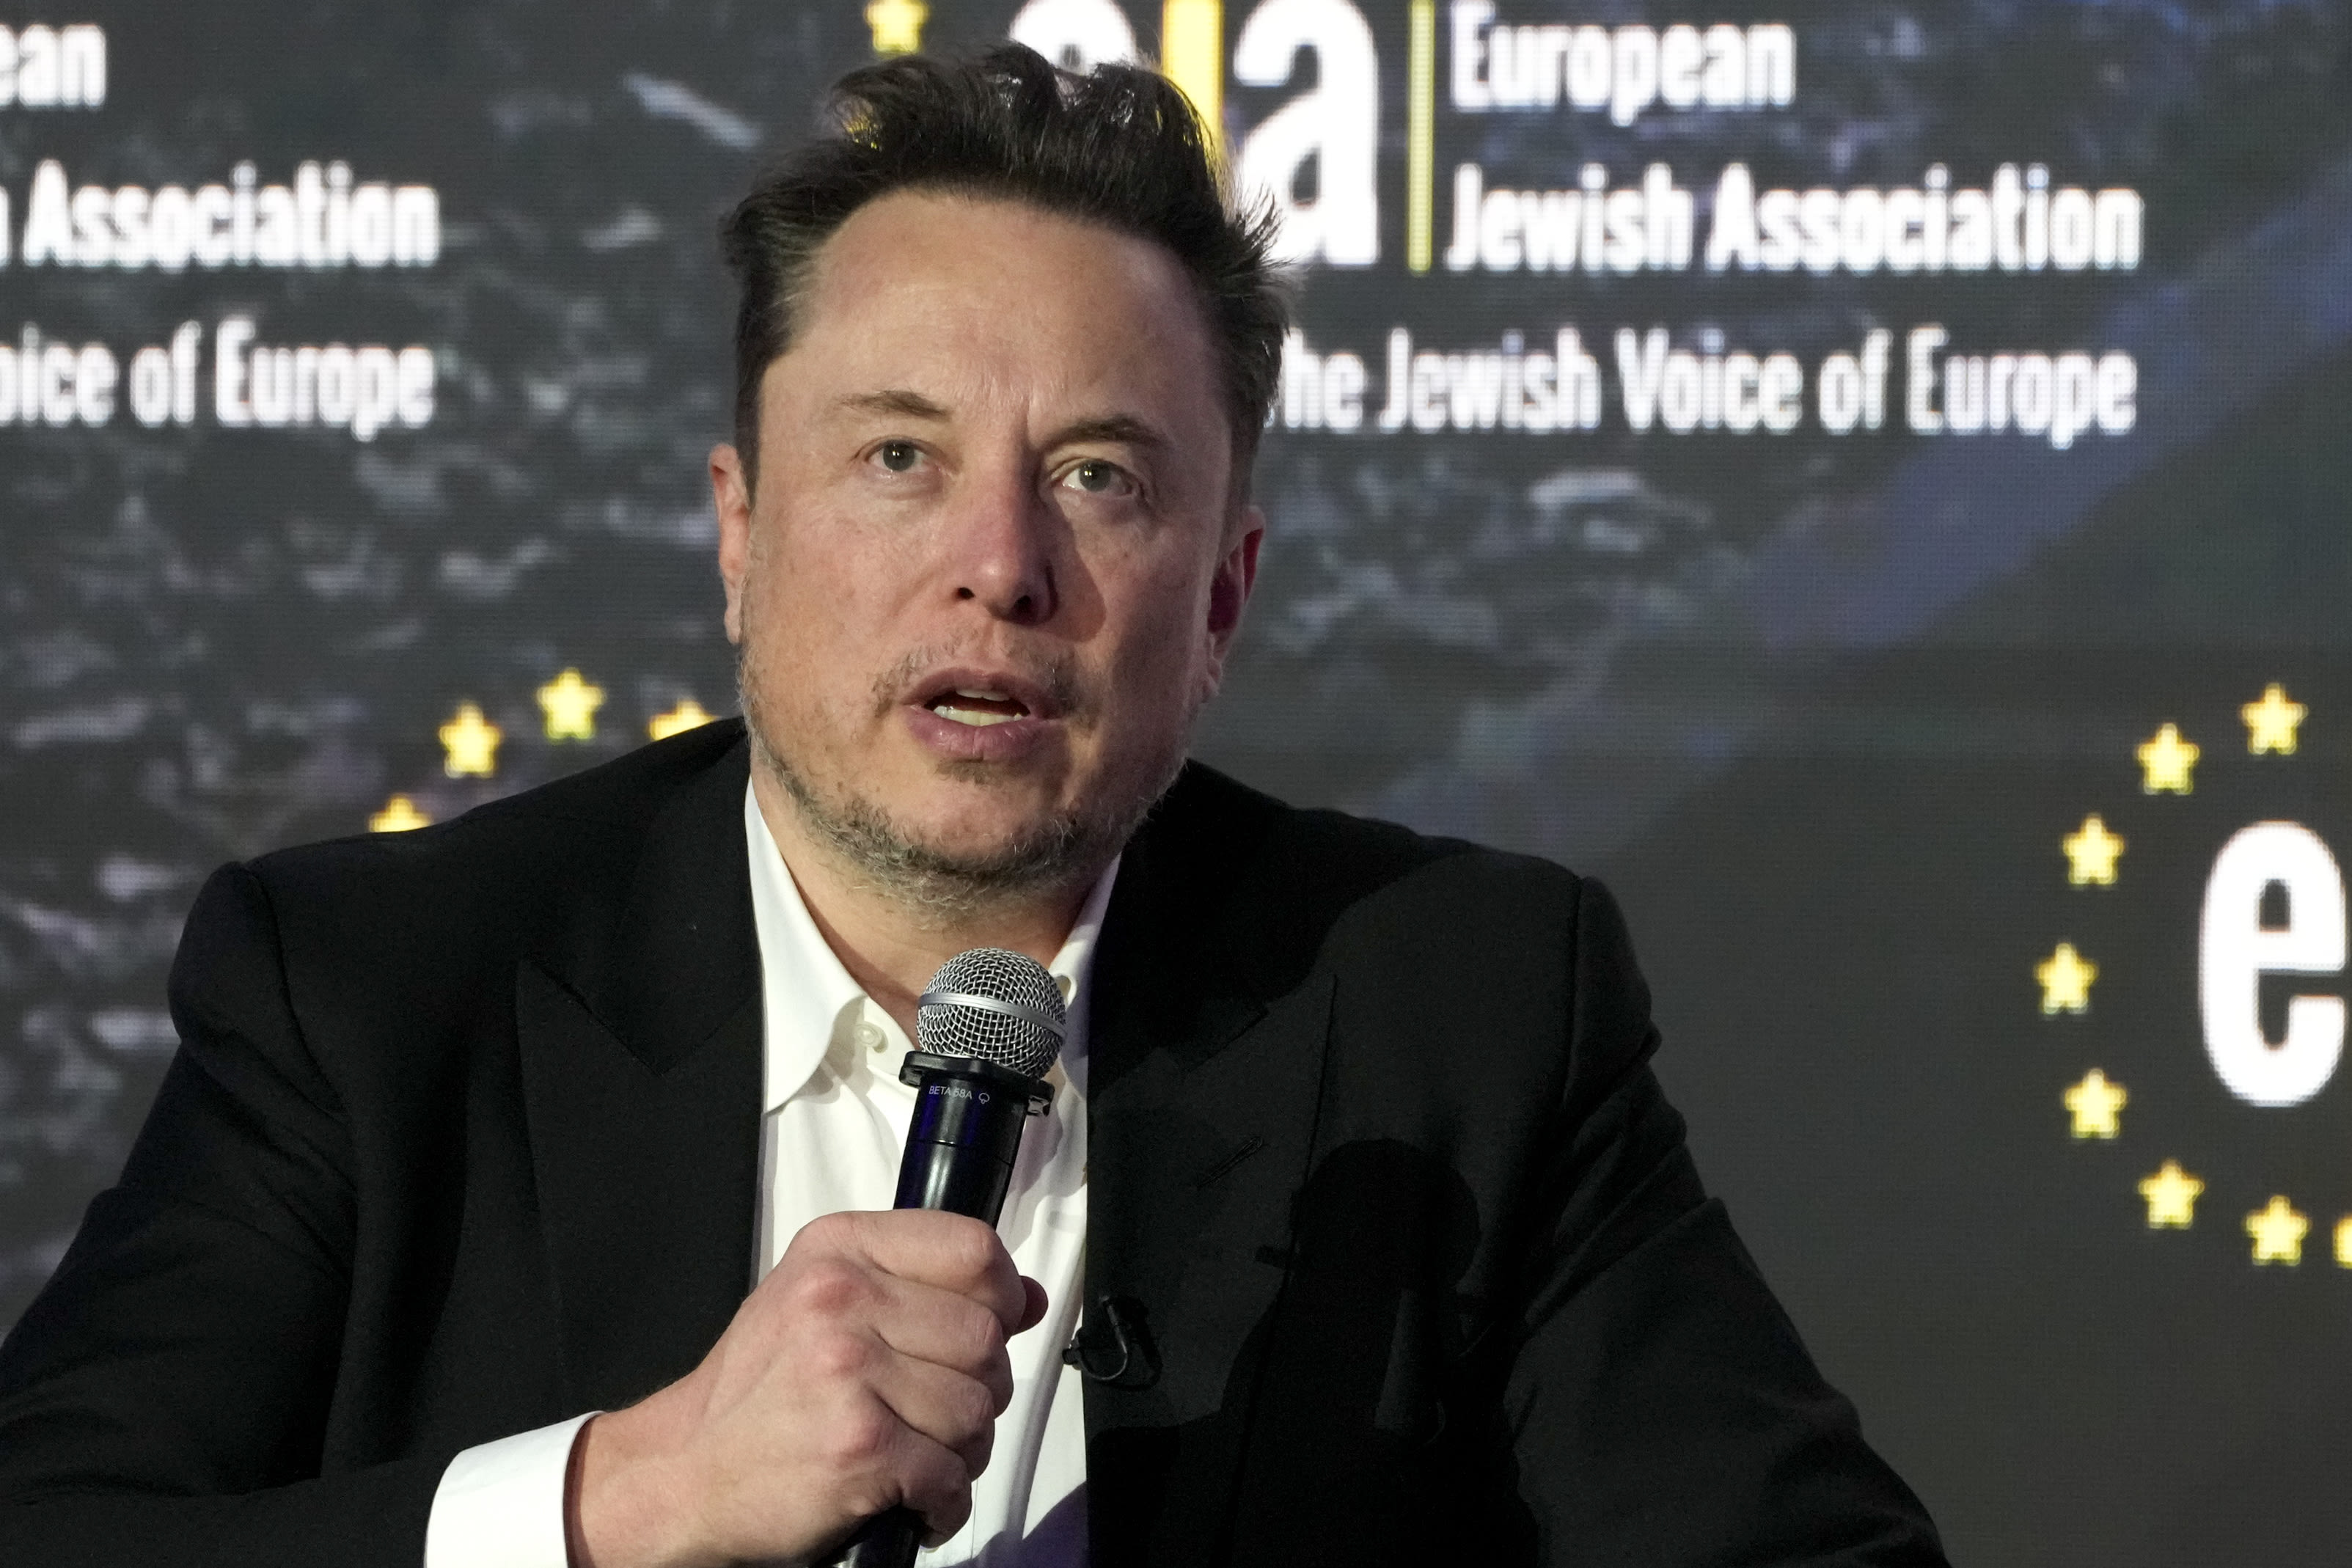 A manipulated video shared by Musk mimics Harris' voice, raising concerns about AI in politics